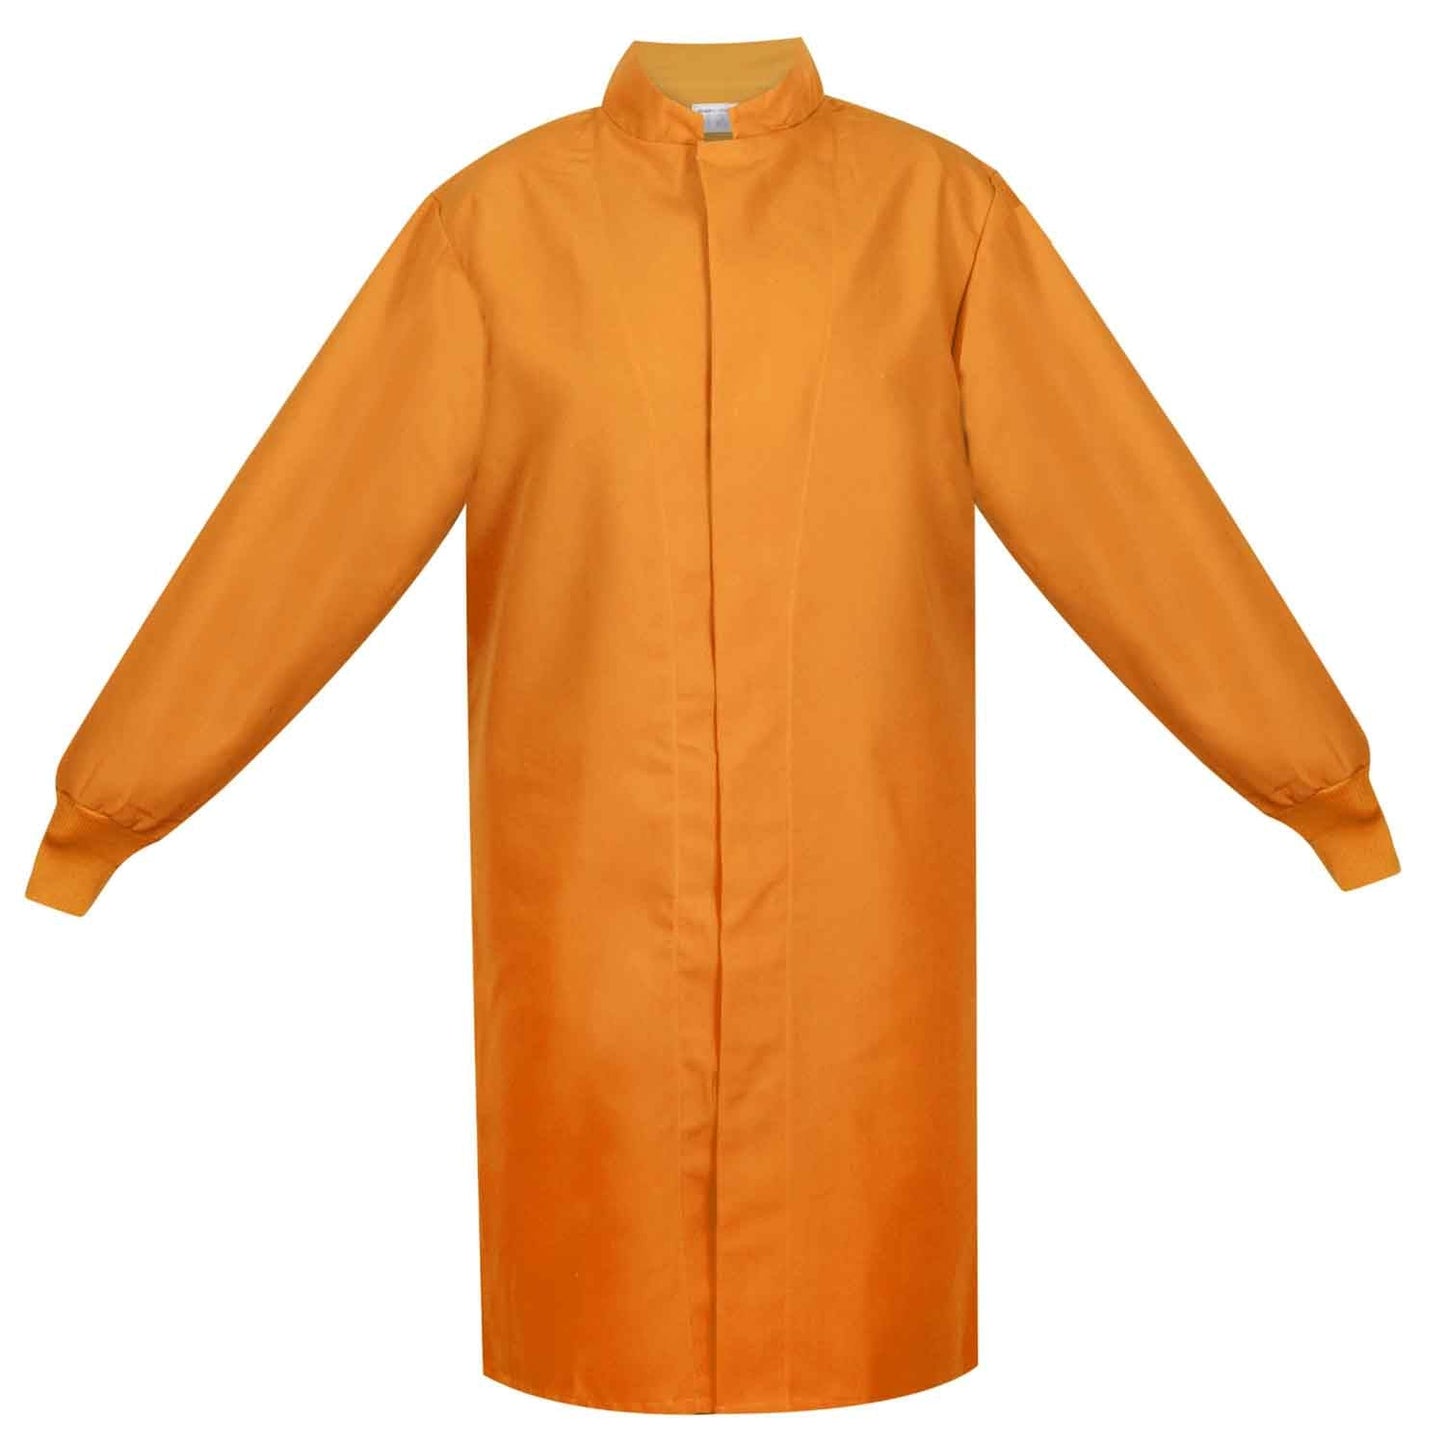 Orange Lab Coat with Long Sleeves and No Pockets